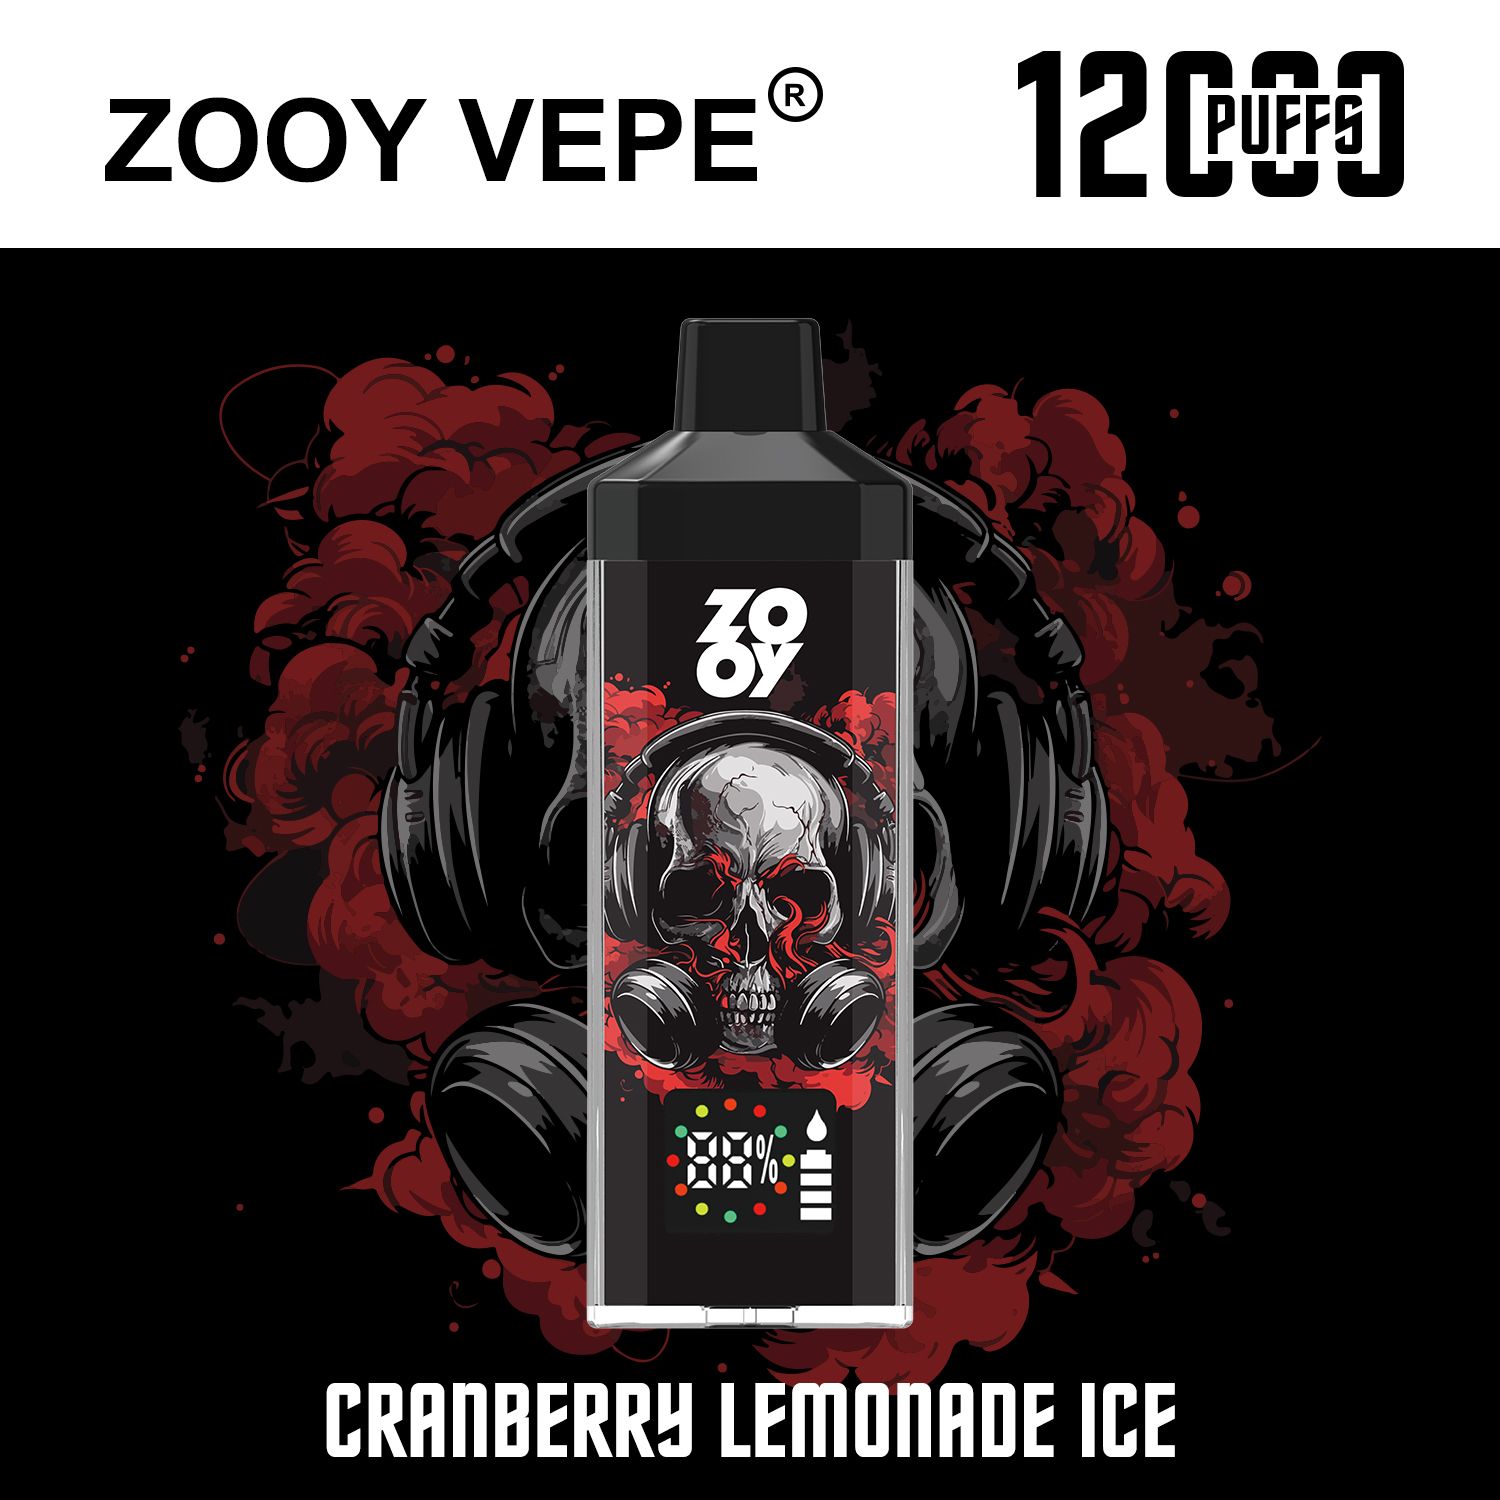 Zooy Ghosts 12000 -Tell Us Flavour